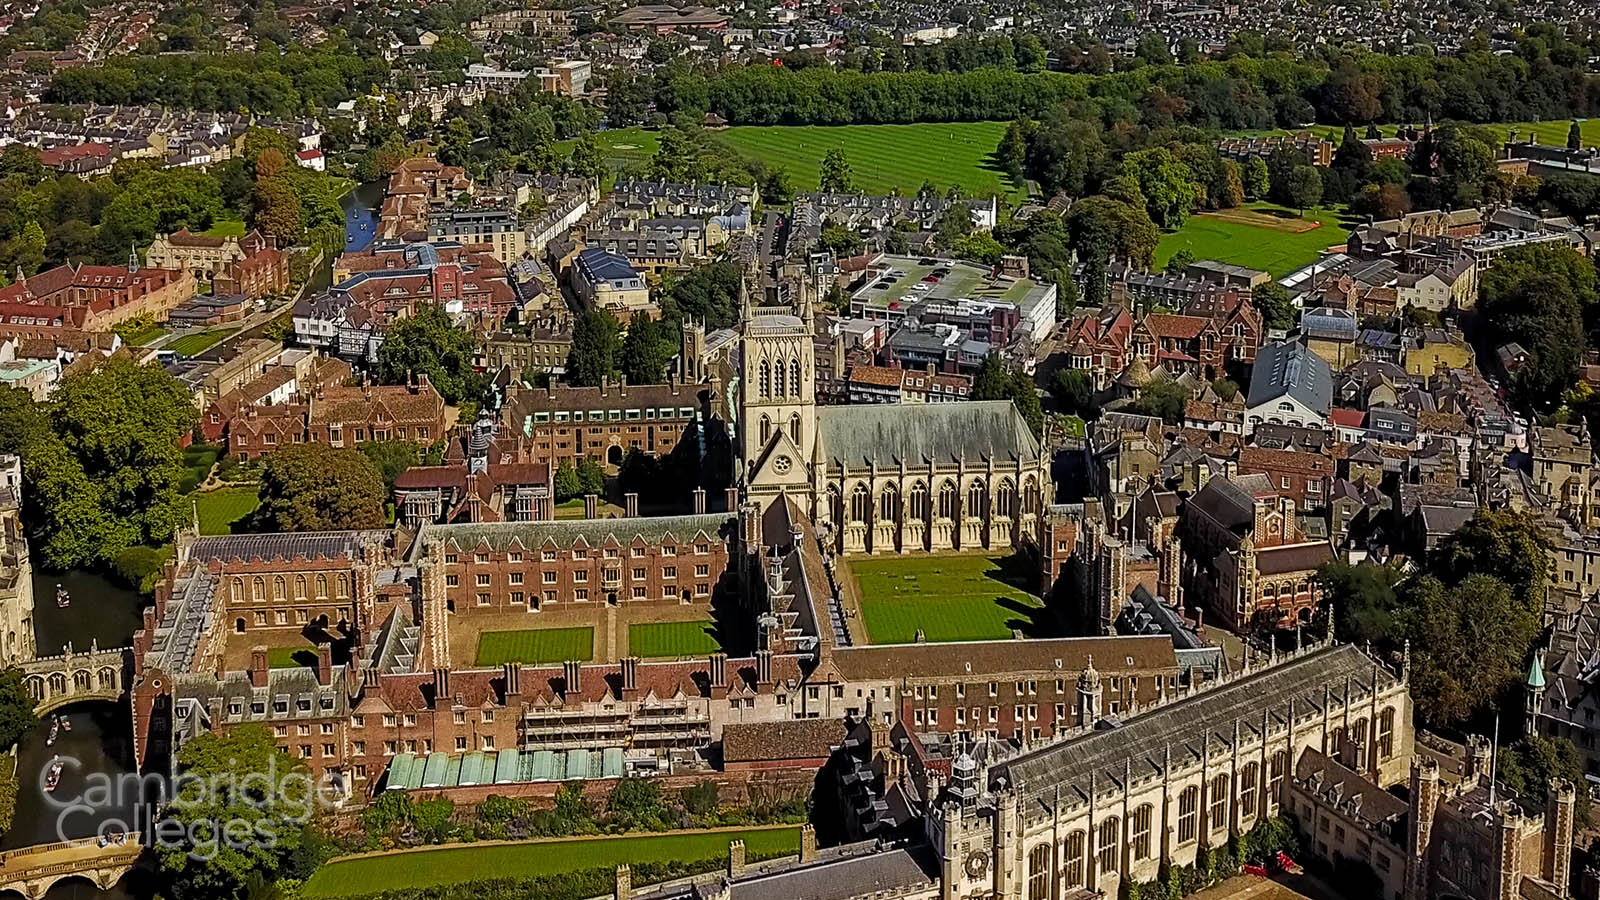 St John's college aerial view